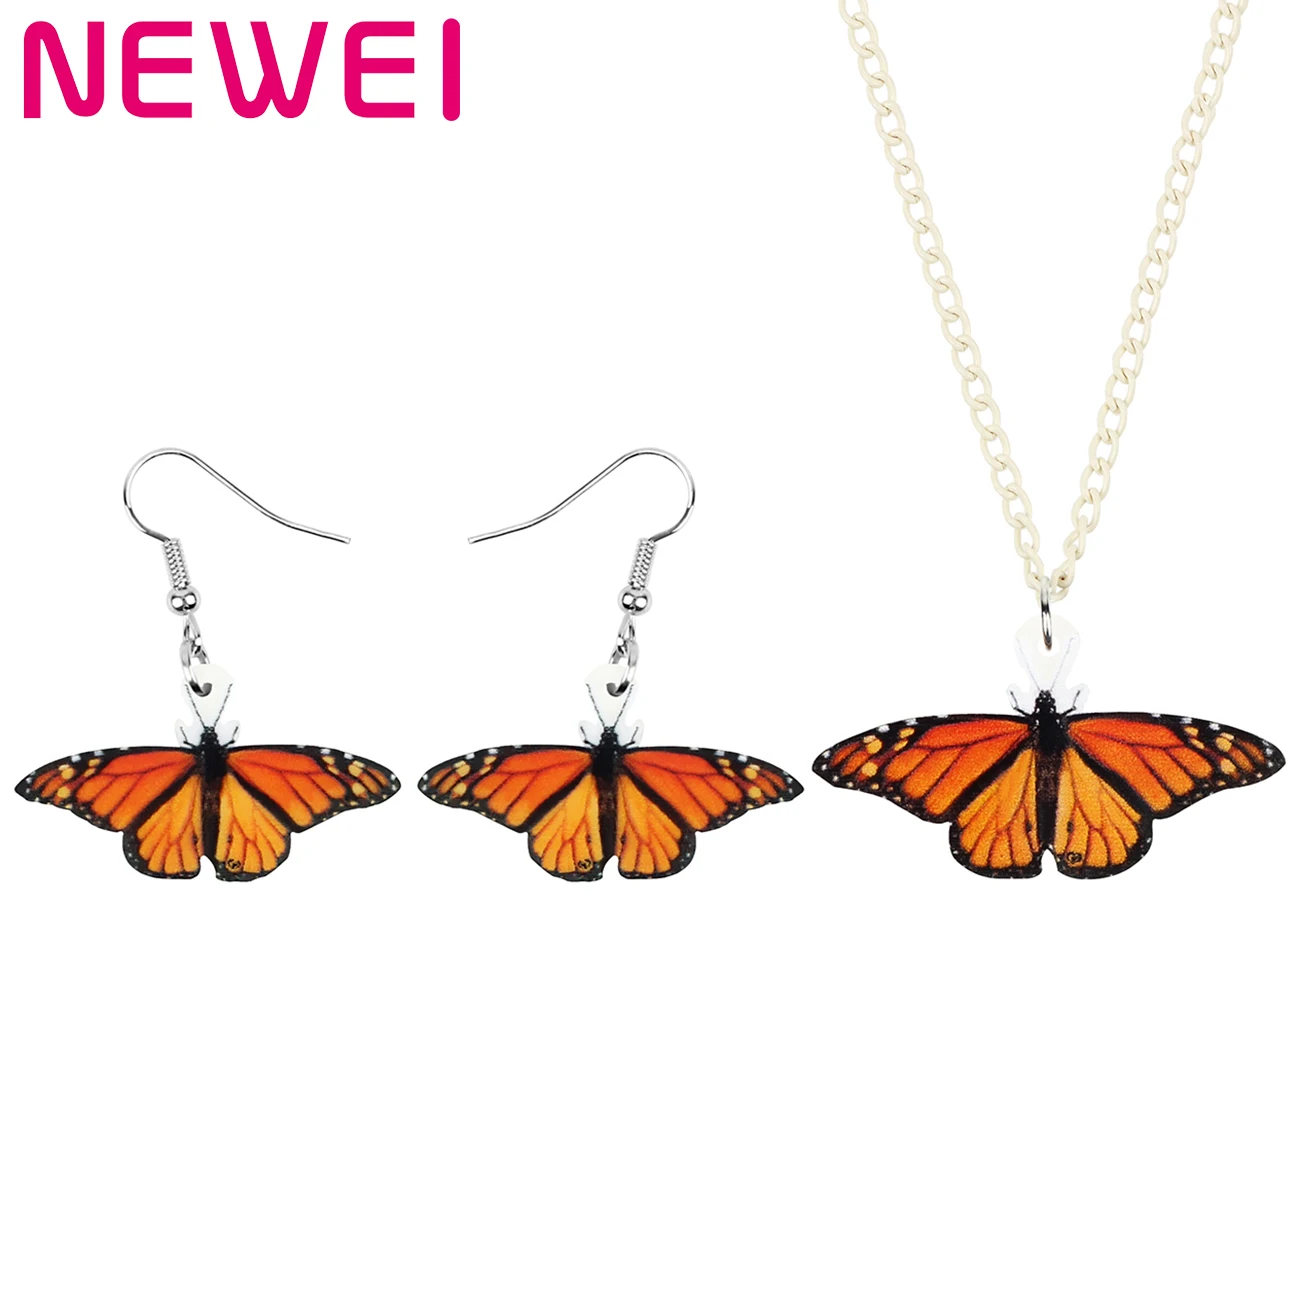 

Newei Acrylic Monarch Butterfly Jewelry Sets Print Lovely Animal Insect Necklace Earrings For Women Girls Kids Gifts Accessories